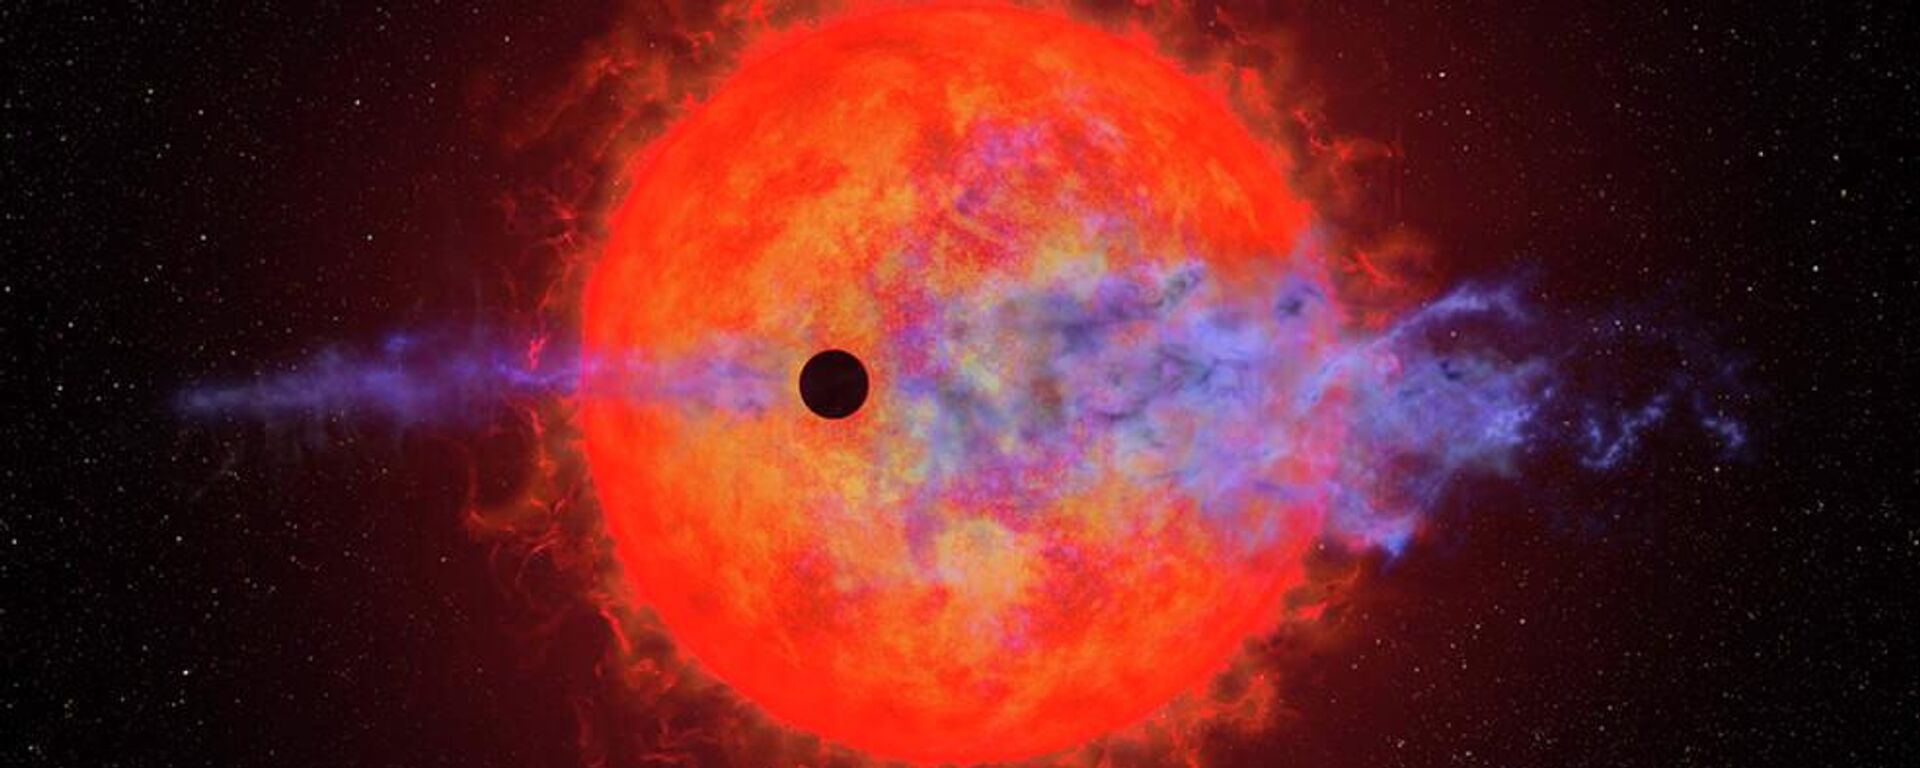 This artist's illustration shows a planet (dark silhouette) passing in front of the red dwarf star AU Microscopii. The planet is so close to the eruptive star a ferocious blast of stellar wind and blistering ultraviolet radiation is heating the planet's hydrogen atmosphere, causing it to escape into space. Four times Earth's diameter, the planet is slowly evaporating its atmosphere, which stretches out linearly along its orbital path. This process may eventually leave behind a rocky core. The illustration is based on measurements made by the Hubble Space Telescope. - Sputnik International, 1920, 01.08.2023